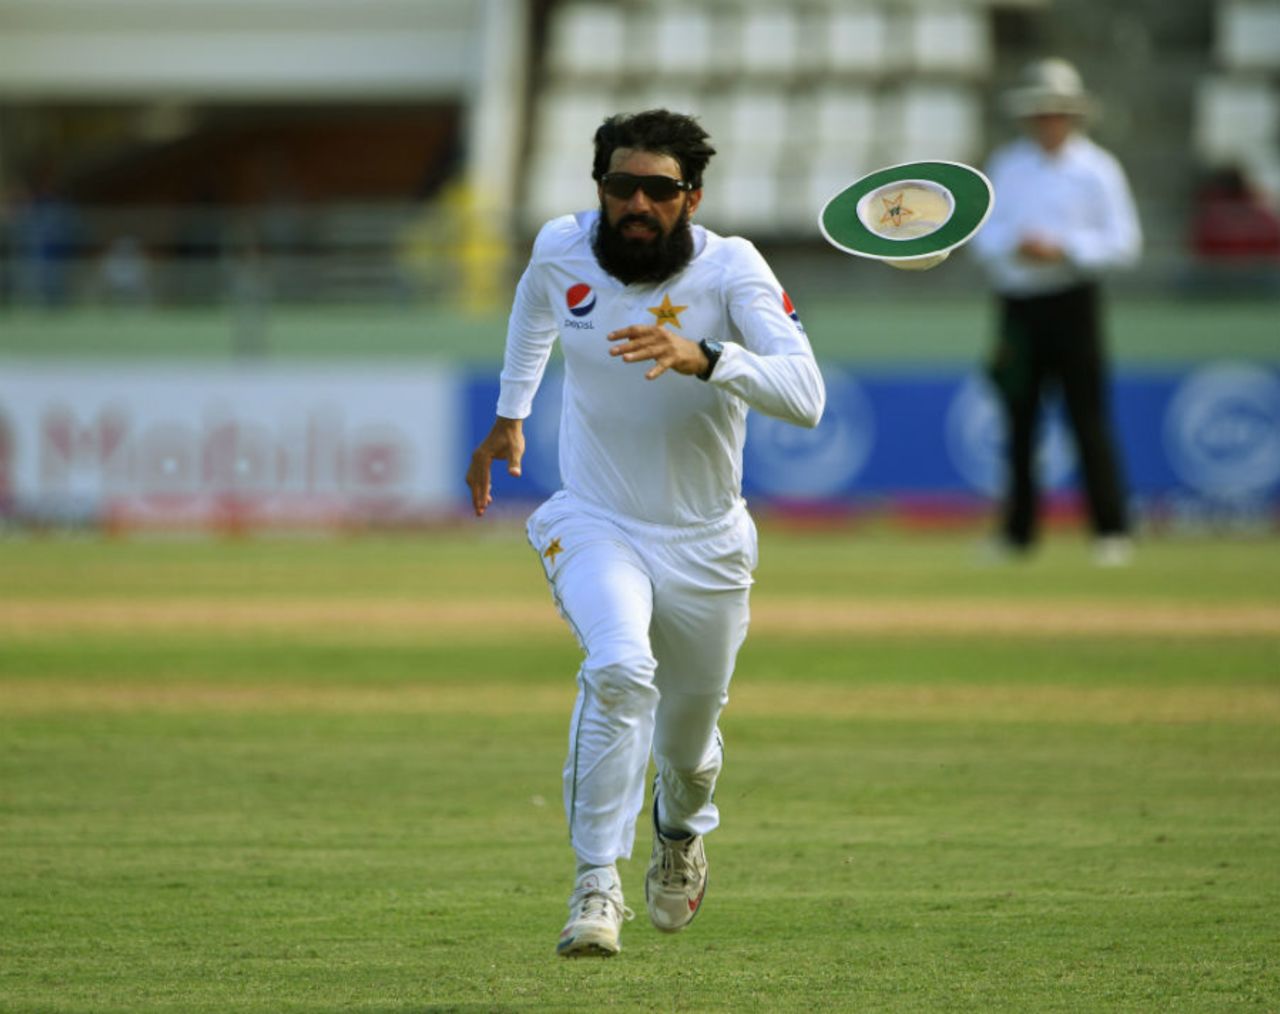 Misbah sprints across to stop a crunching drive, West Indies v Pakistan, 3rd Test, Roseau, 3rd day, May 12, 2017